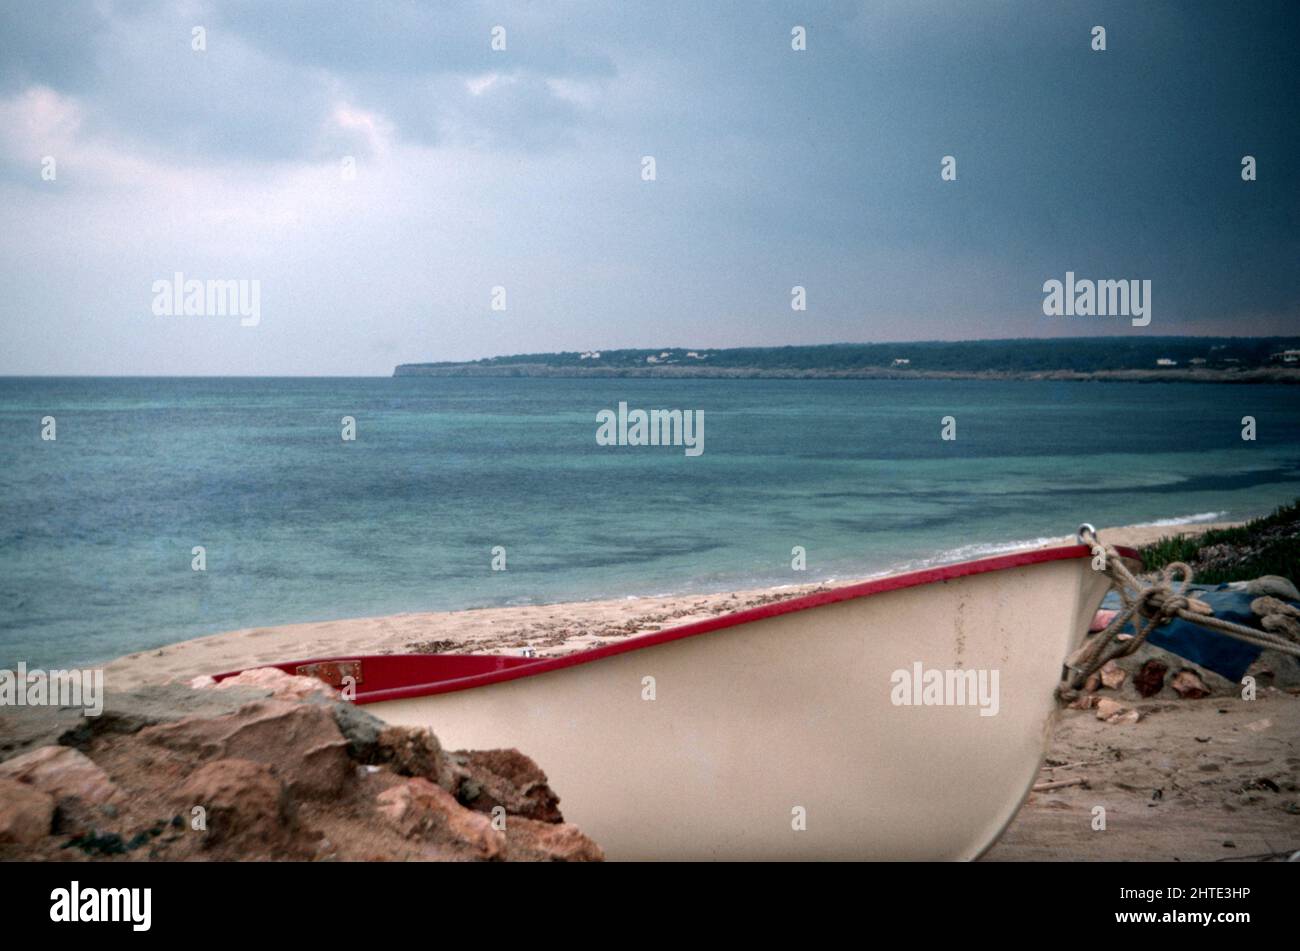 Small wooden boat on the beach, Holiday and tourism concept Stock Photo